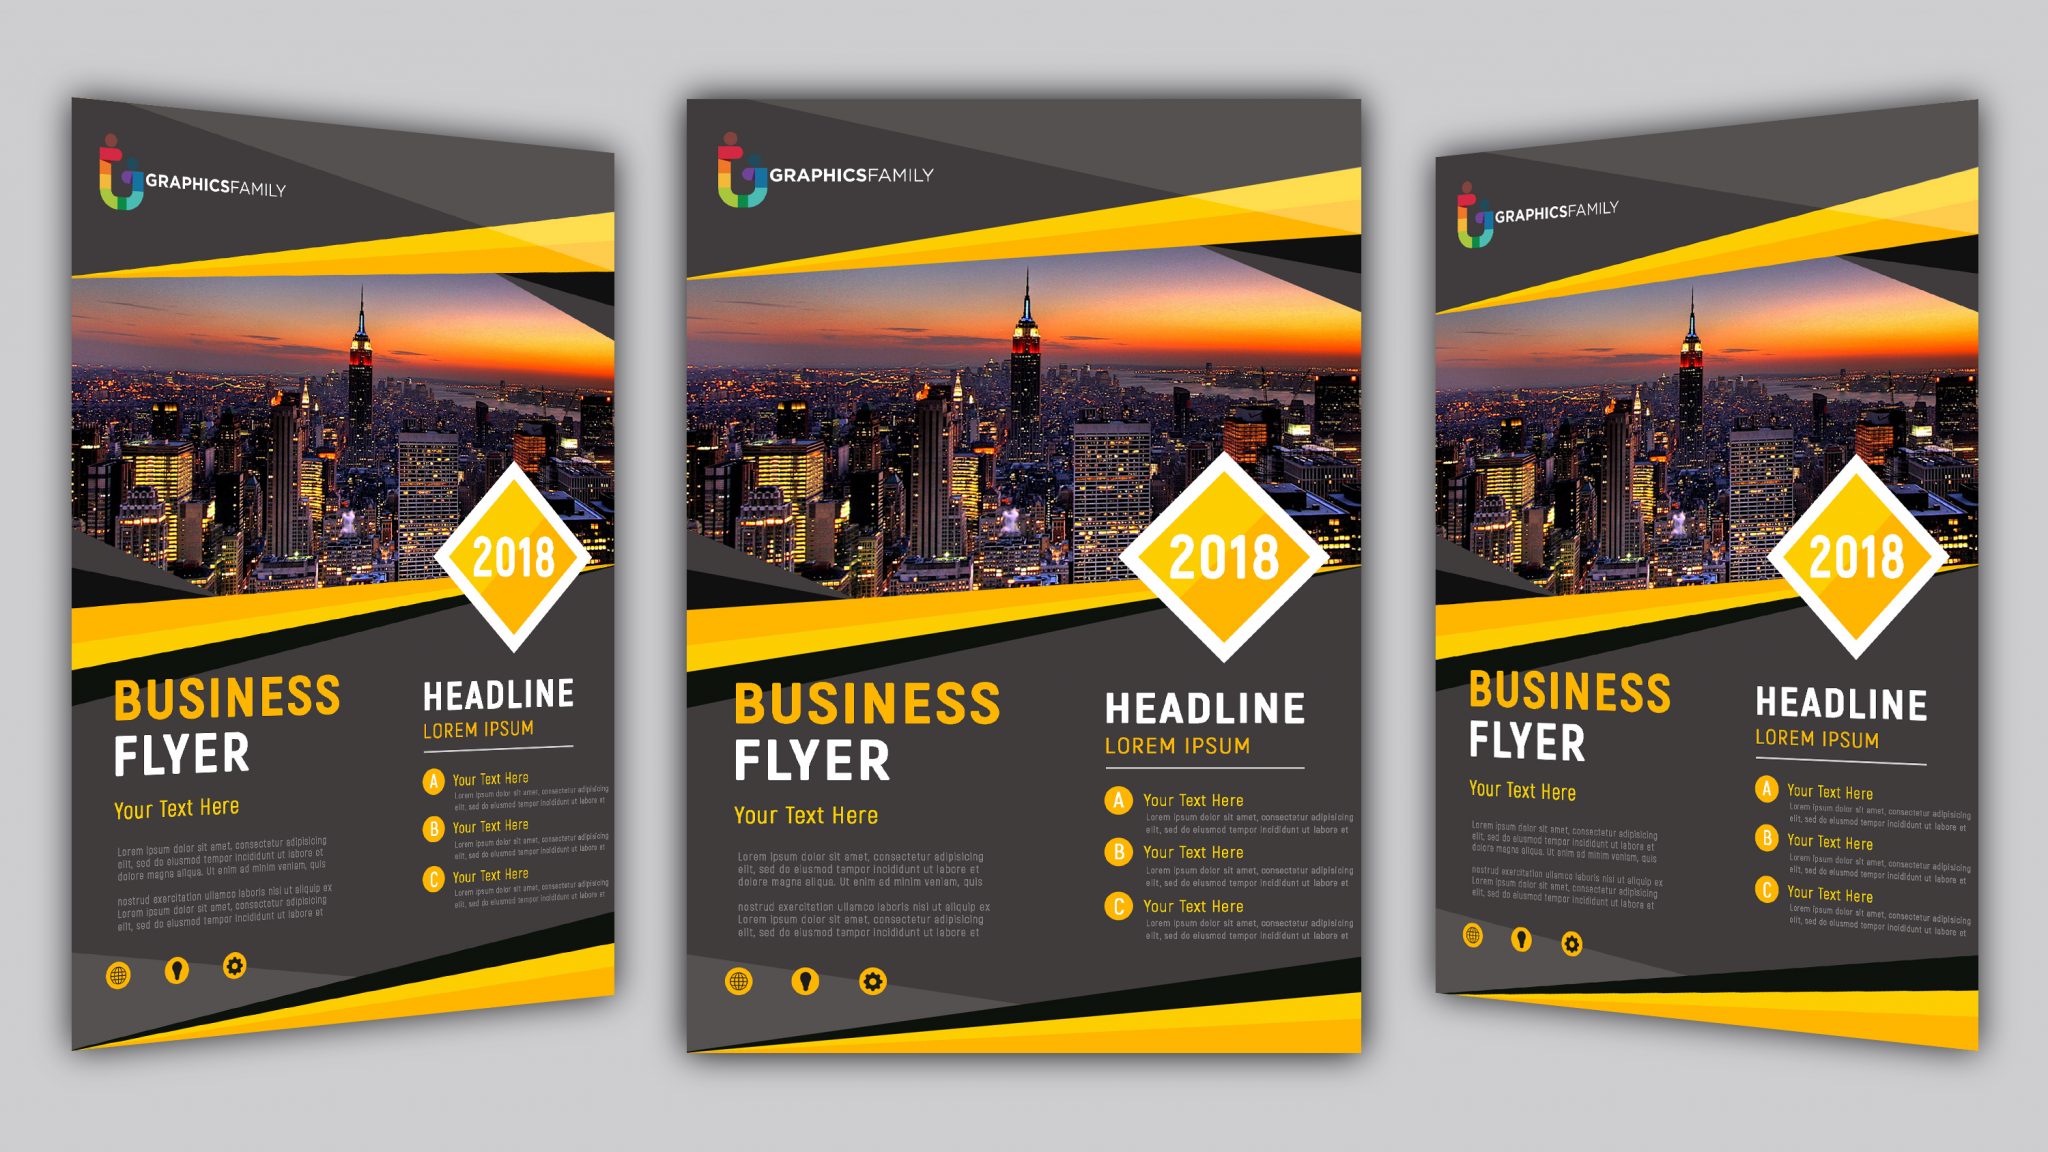 Free Flyers Download: PSD AI EPS GraphicsFamily